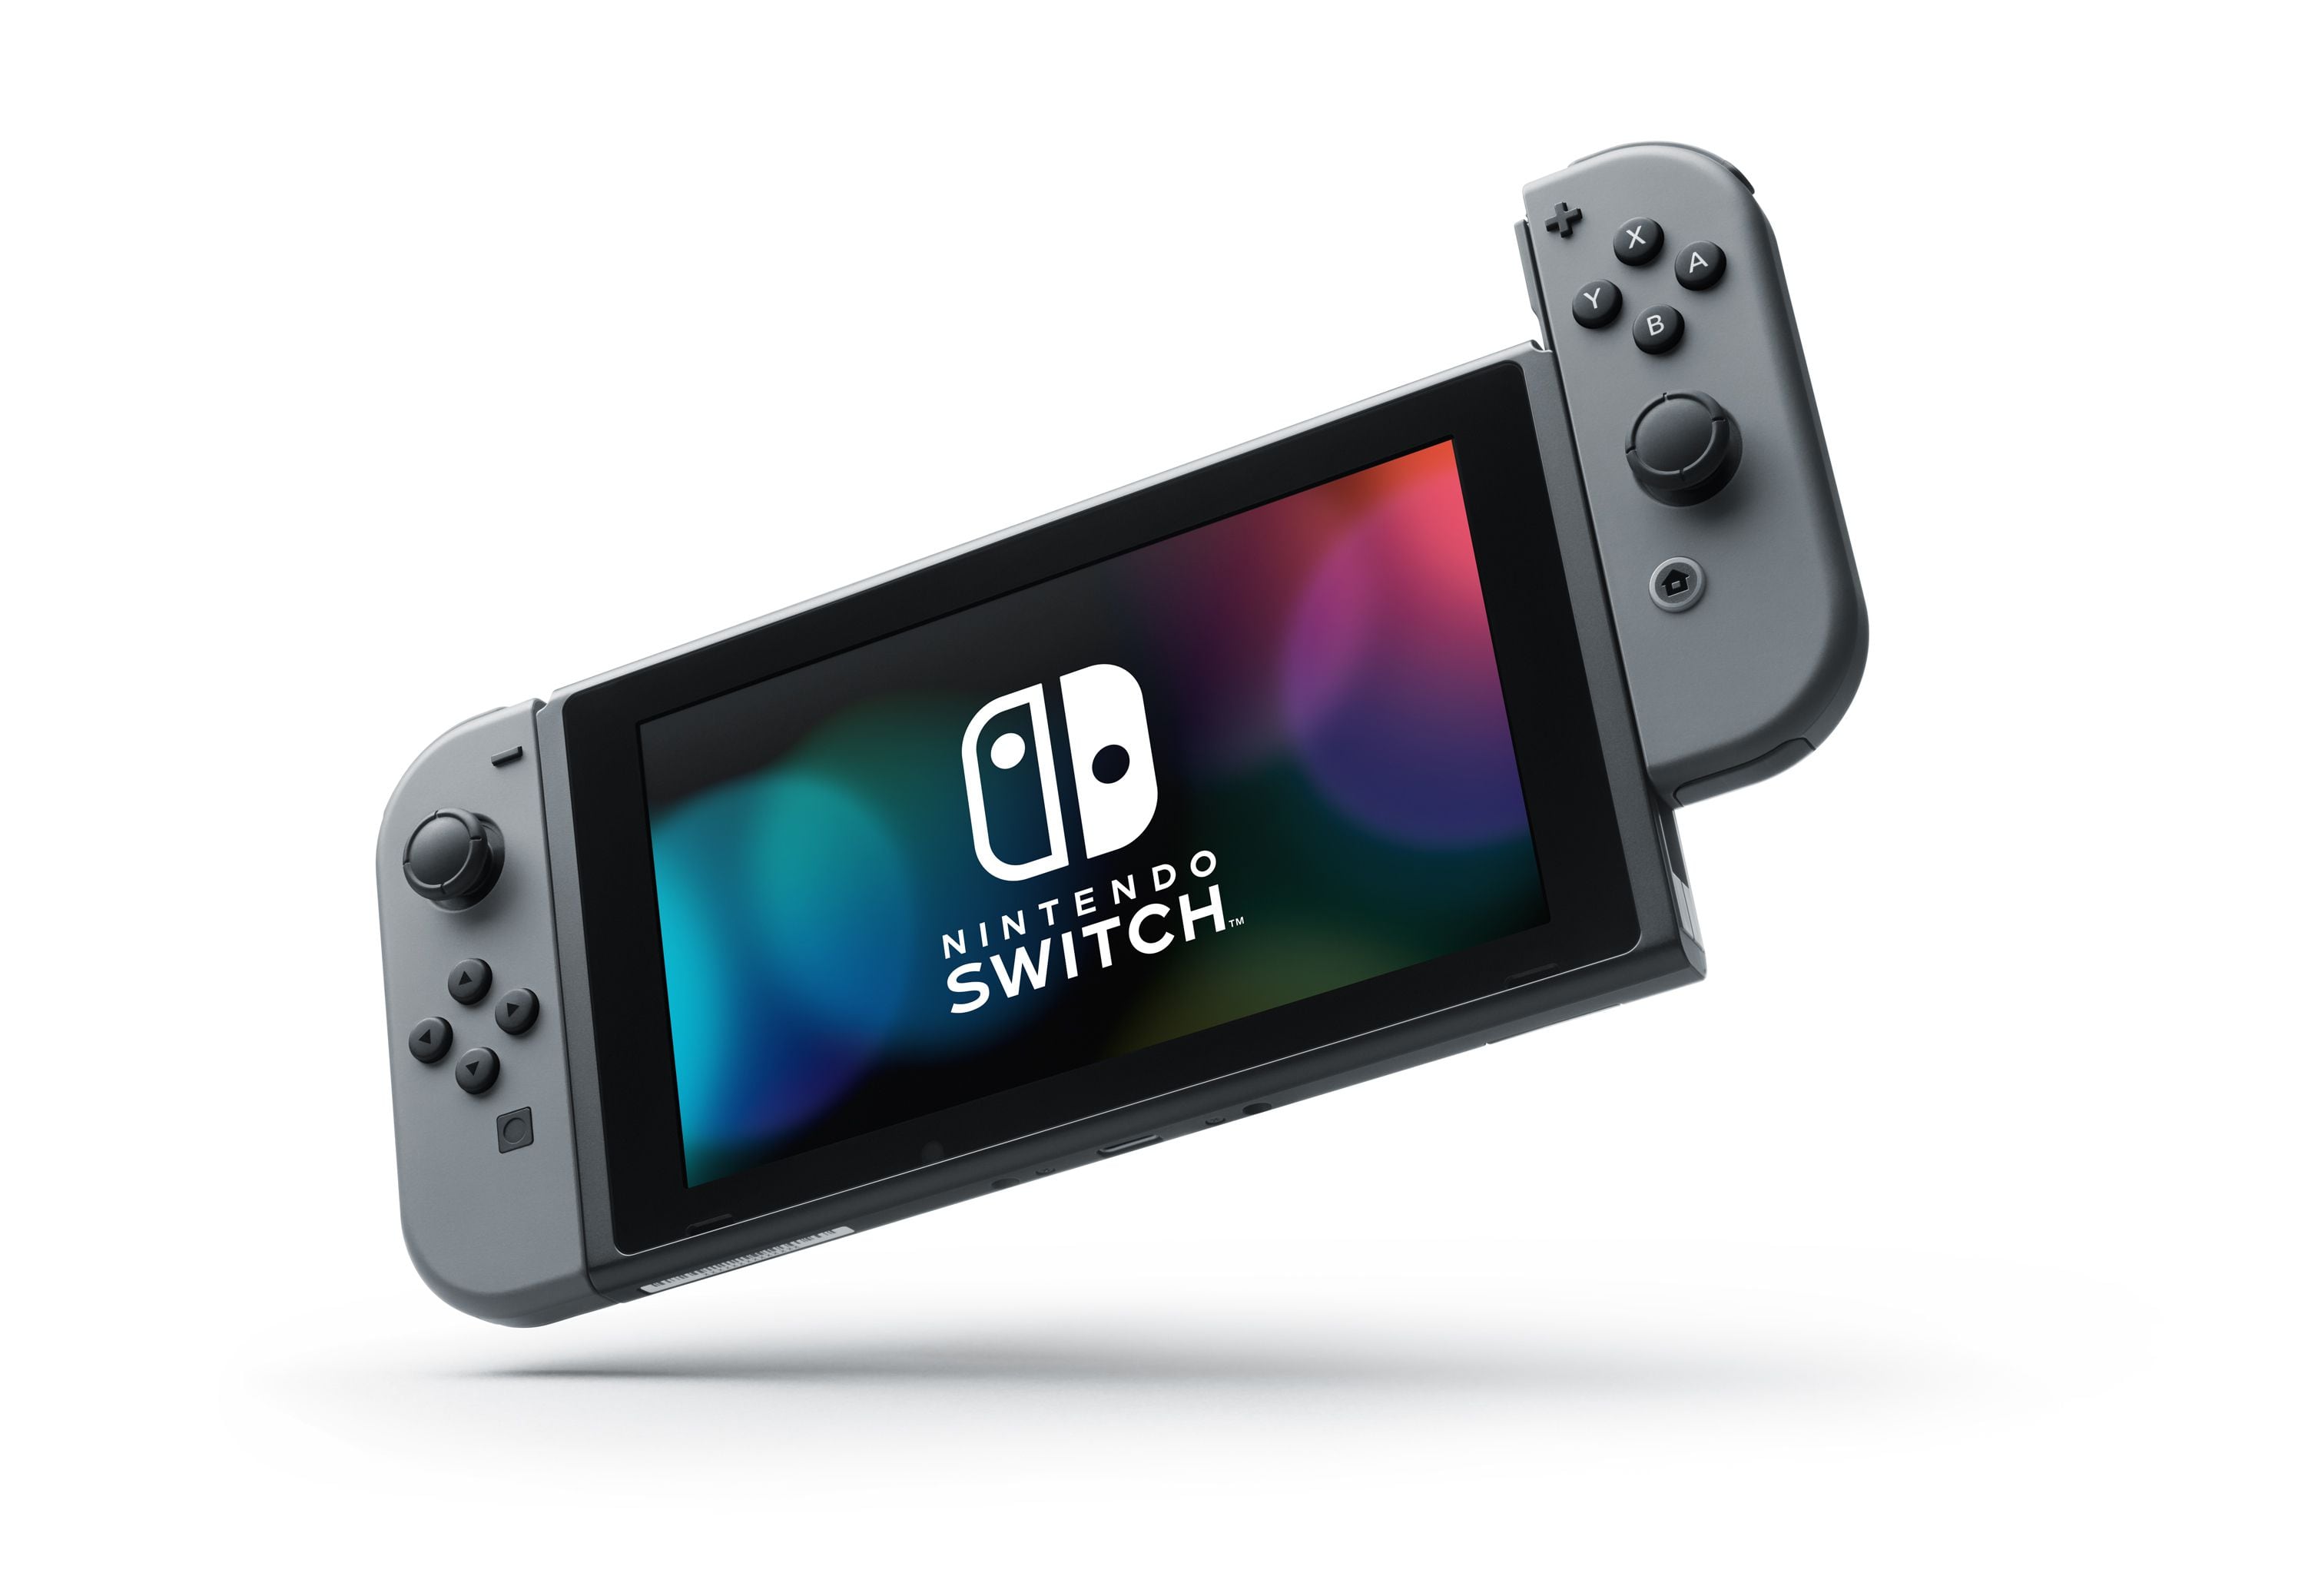 Nintendo Switch 2 release date and price might've just leaked